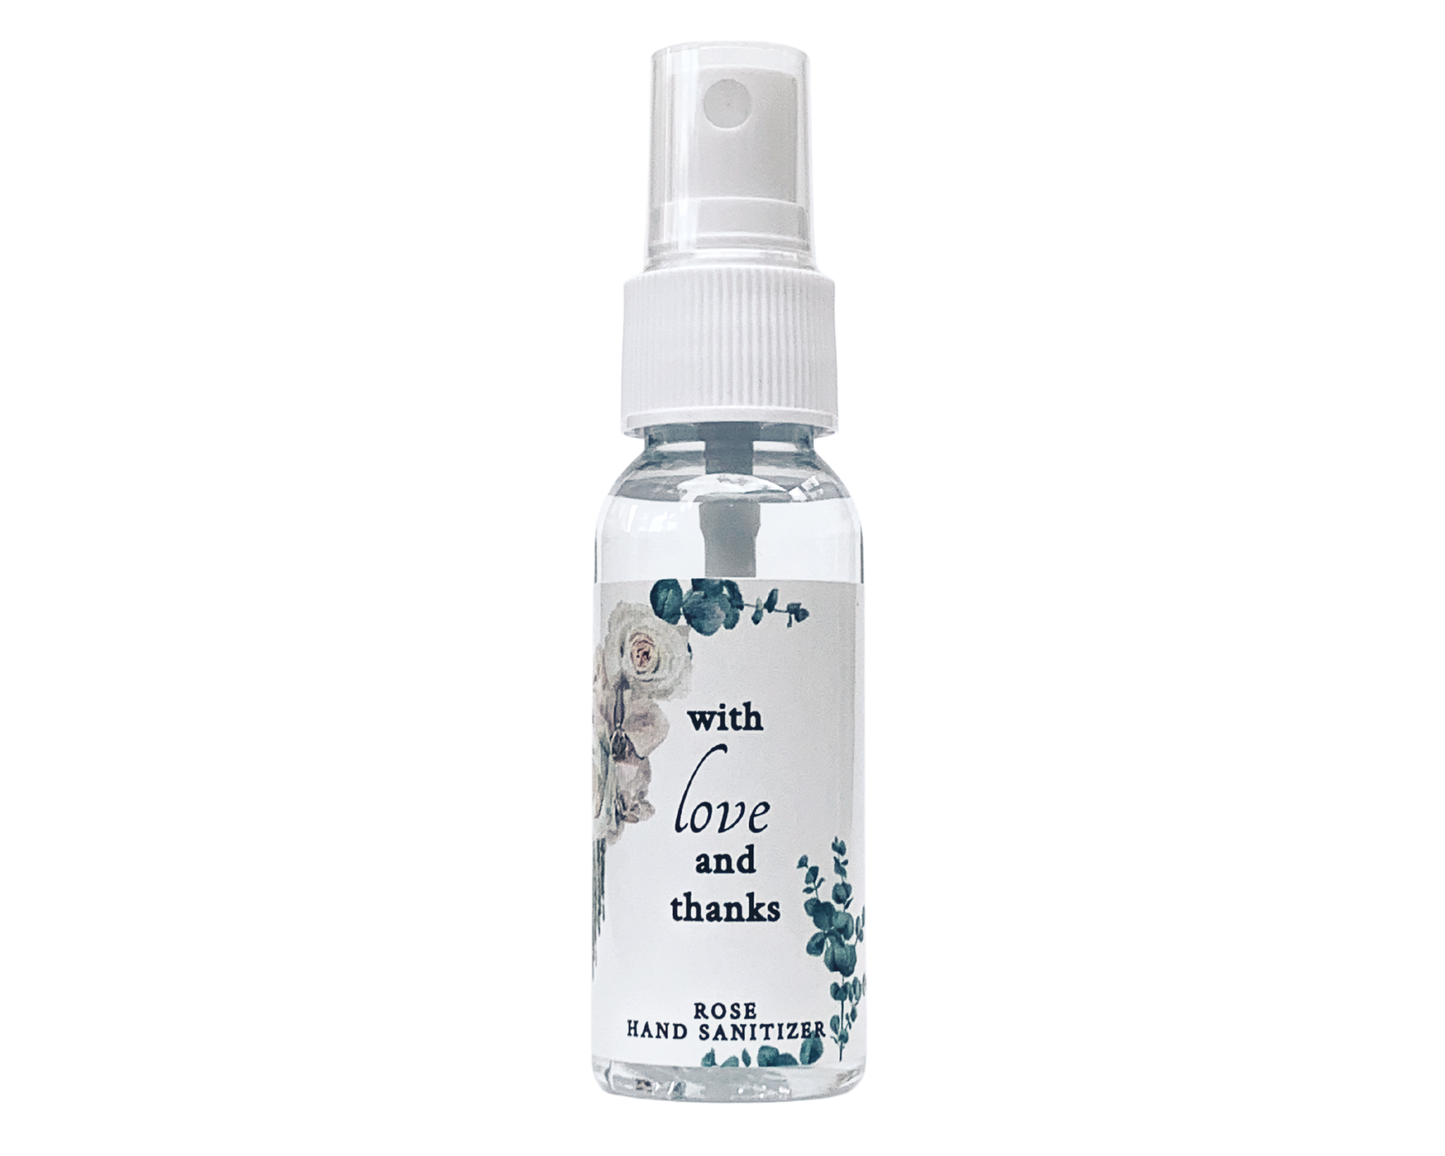 Hand Sanitizer Party Favor - White Roses - With Love and Thanks - with Aloe & Essential Oils by Sunshine & Sanitizer